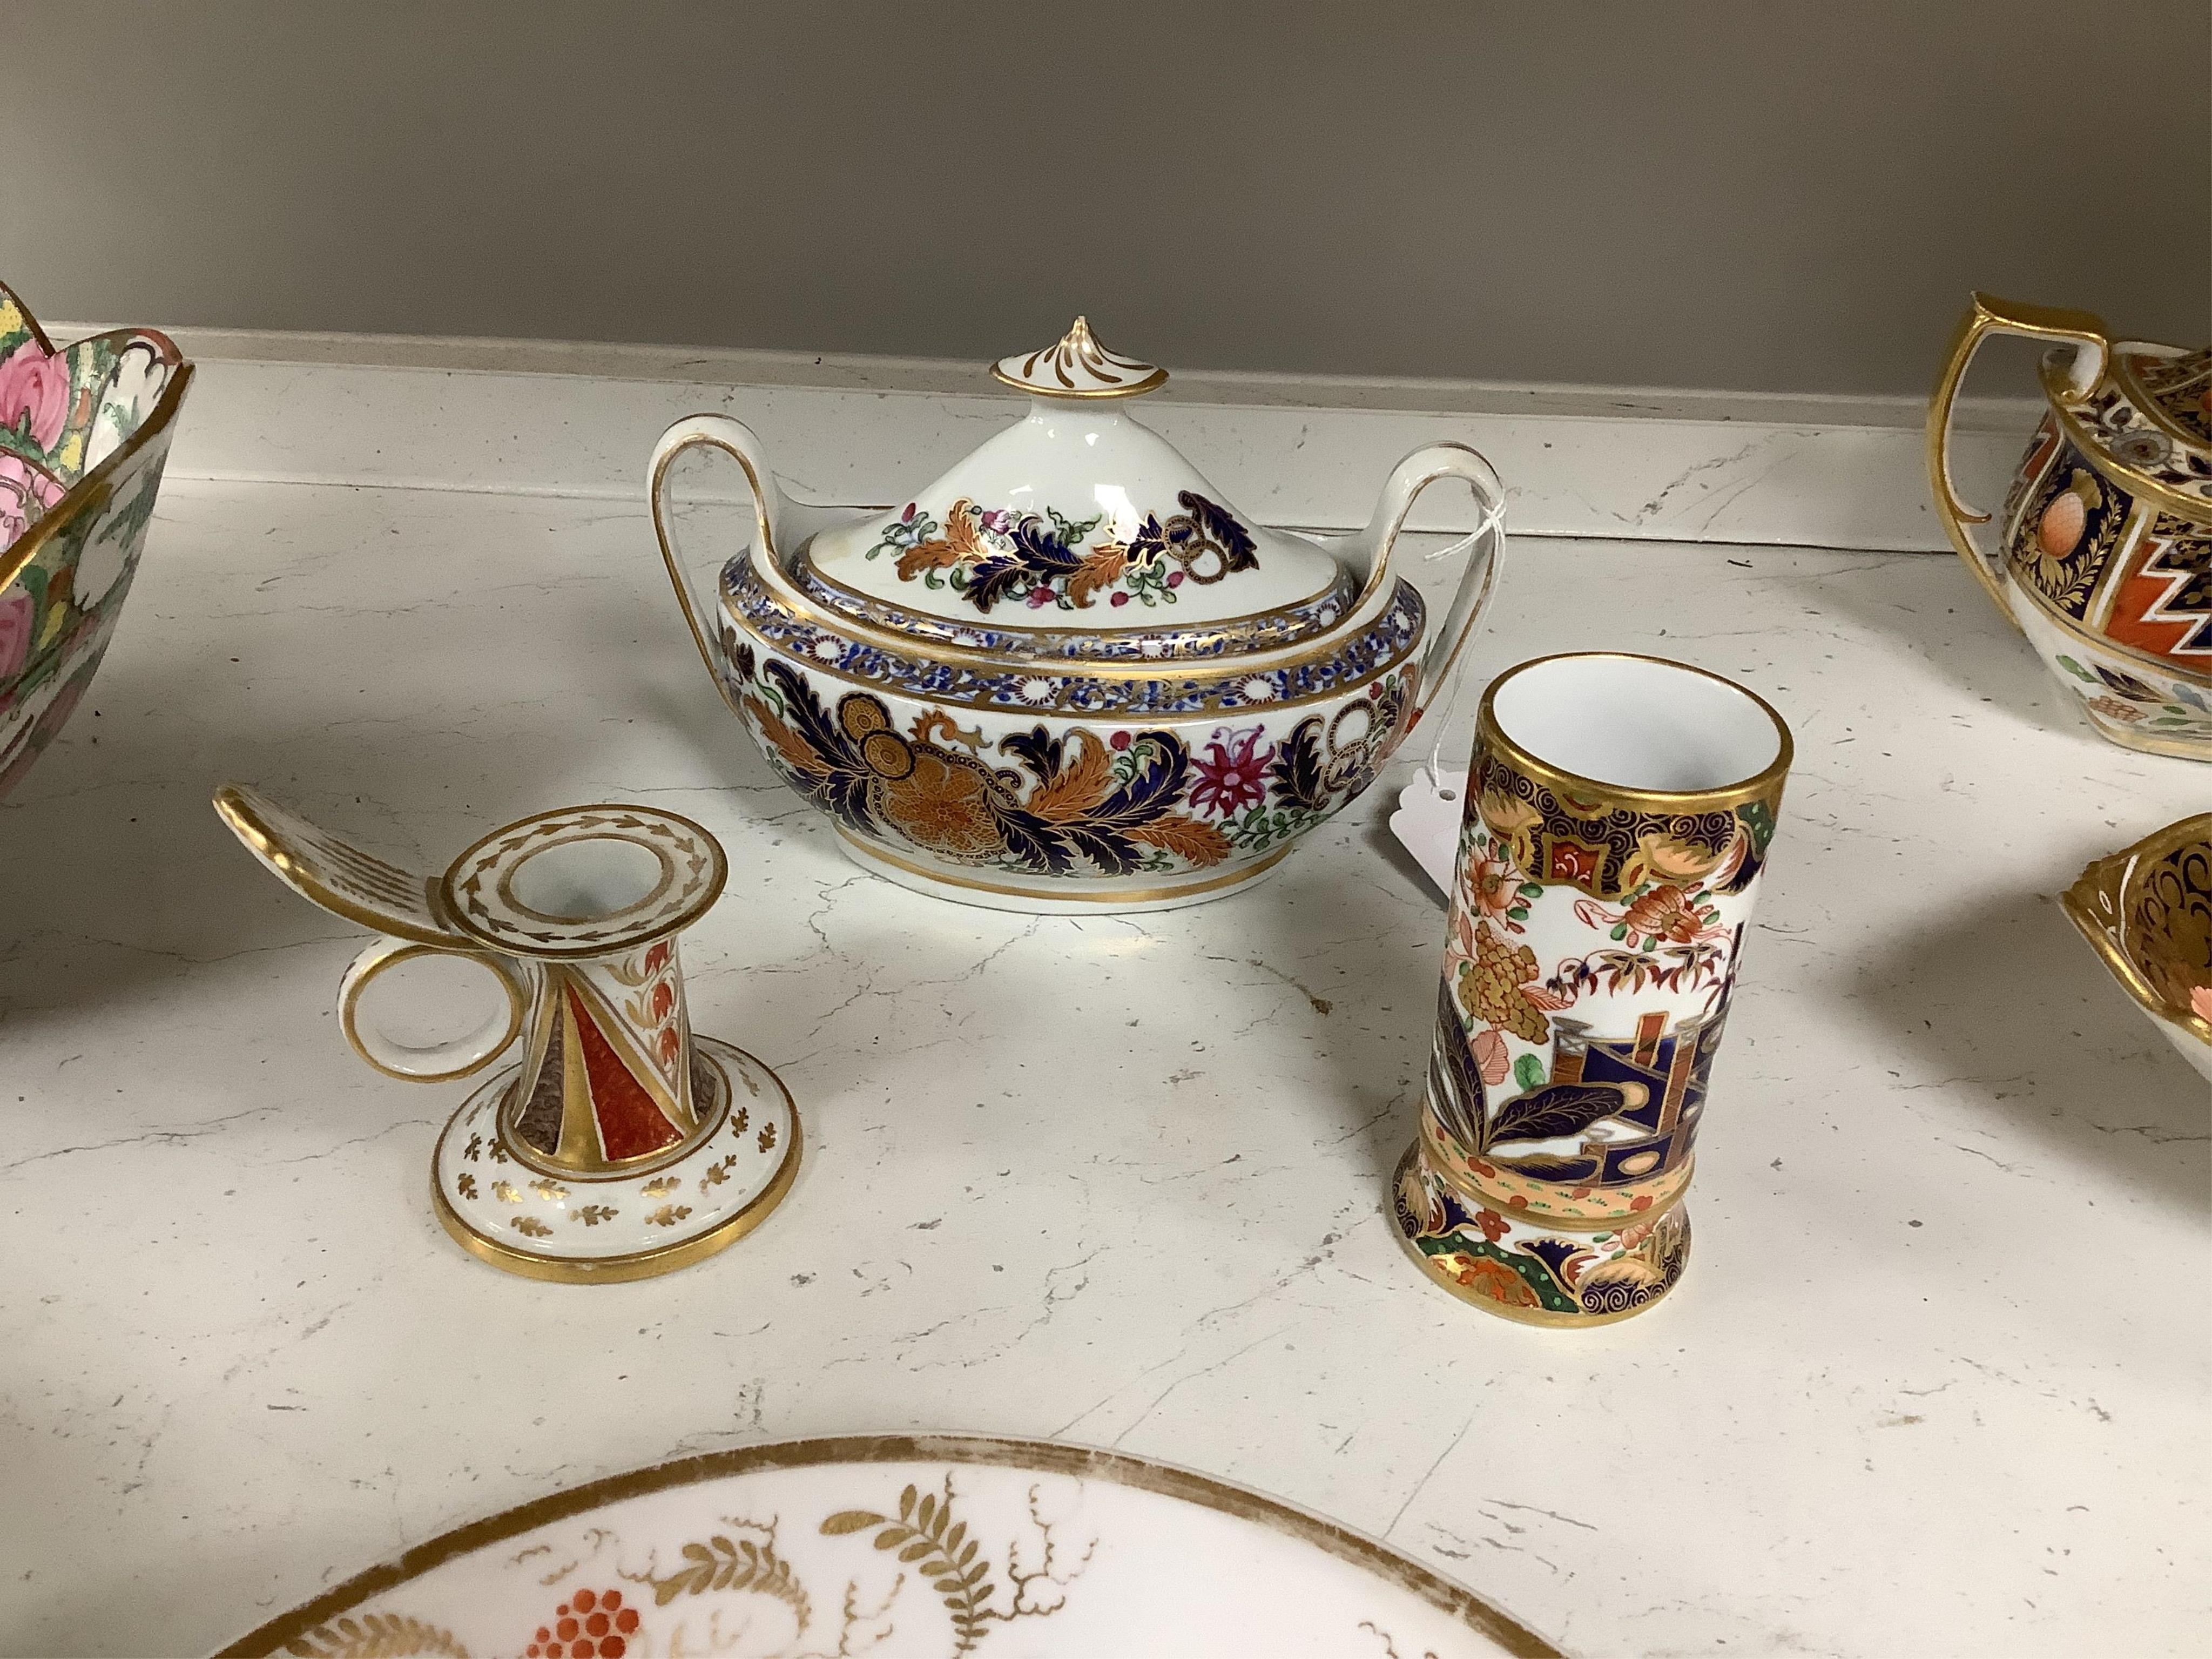 Sixteen mixed items of 1800-1820 English porcelain tableware, to include: three sucriers and covers, an oval ornately decorated dish, four saucer dishes, a candle holder, three spill vases and four saucers